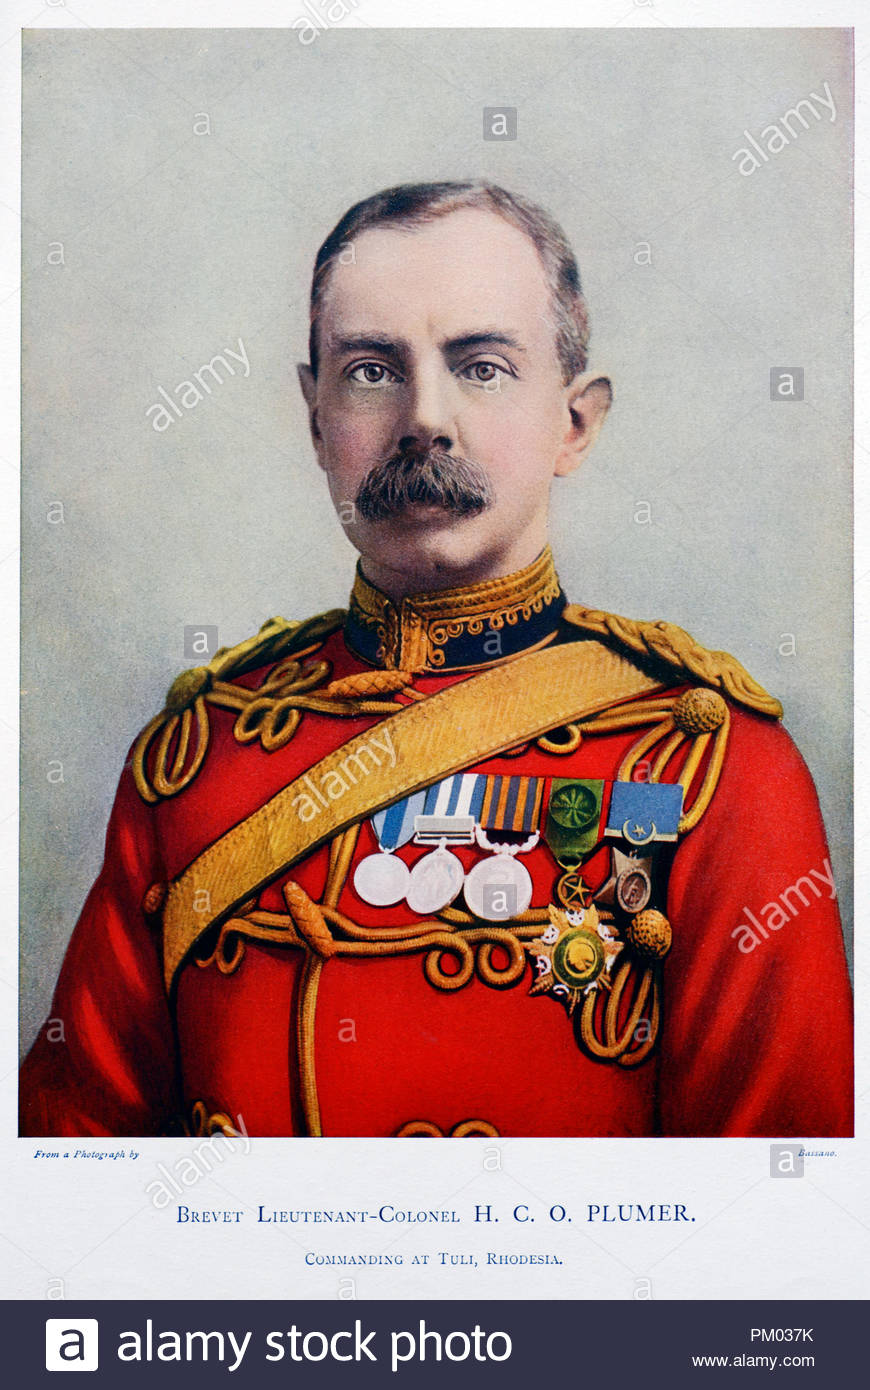 Field Marshal Herbert Charles Onslow Plumer, 1st Viscount Plumer, GCB, GCMG, GCVO, GBE, 1857 – 1932, was a senior British Army officer of the First World War. Colour illustration from 1900 Stock Photo